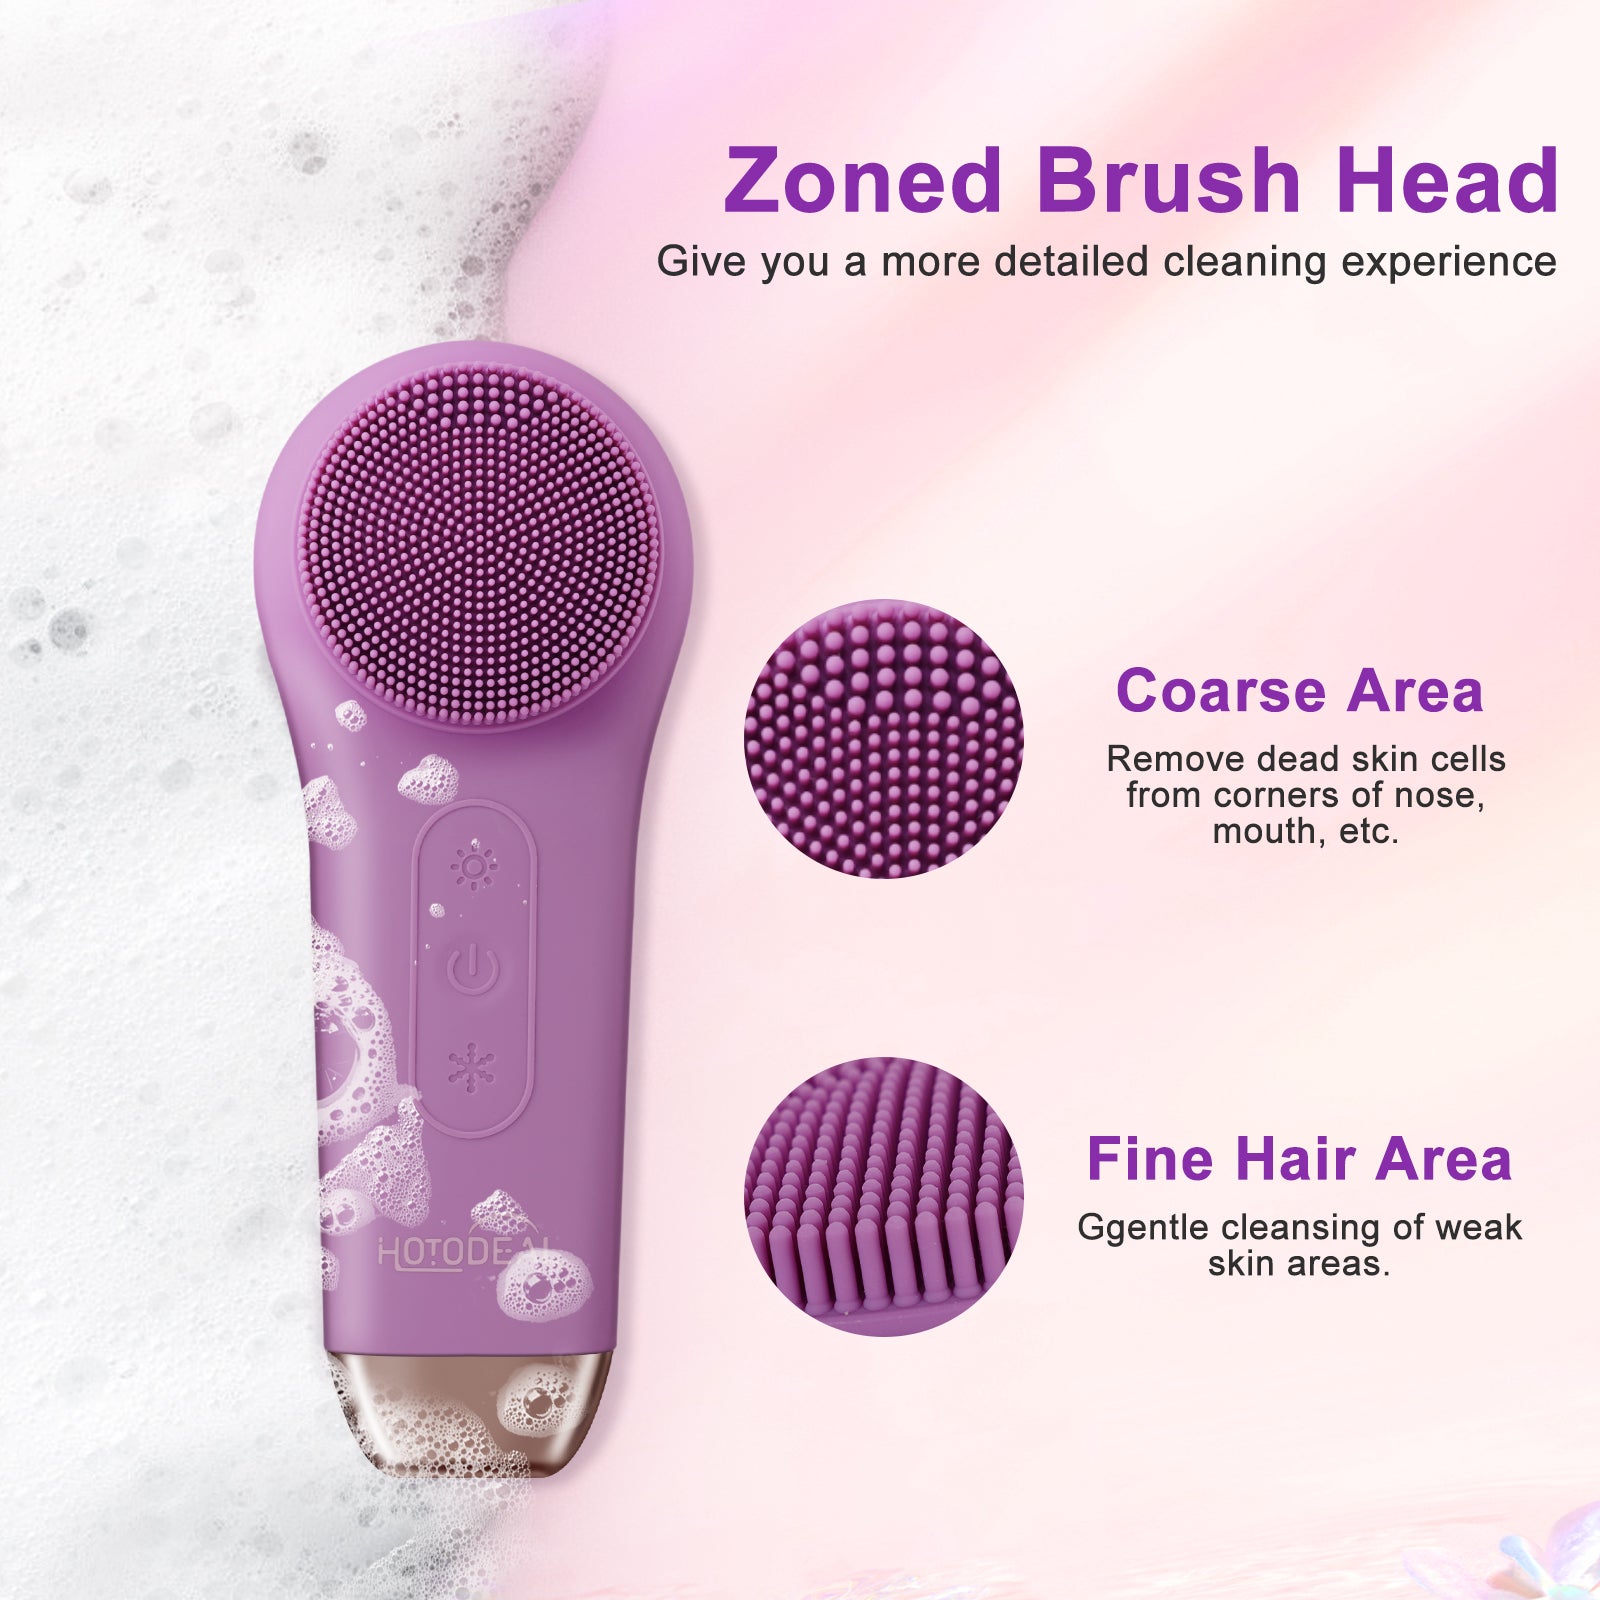 Facial Cleansing Brush- Hotodeal Silicone Magnetic Rechargeable Face Brush